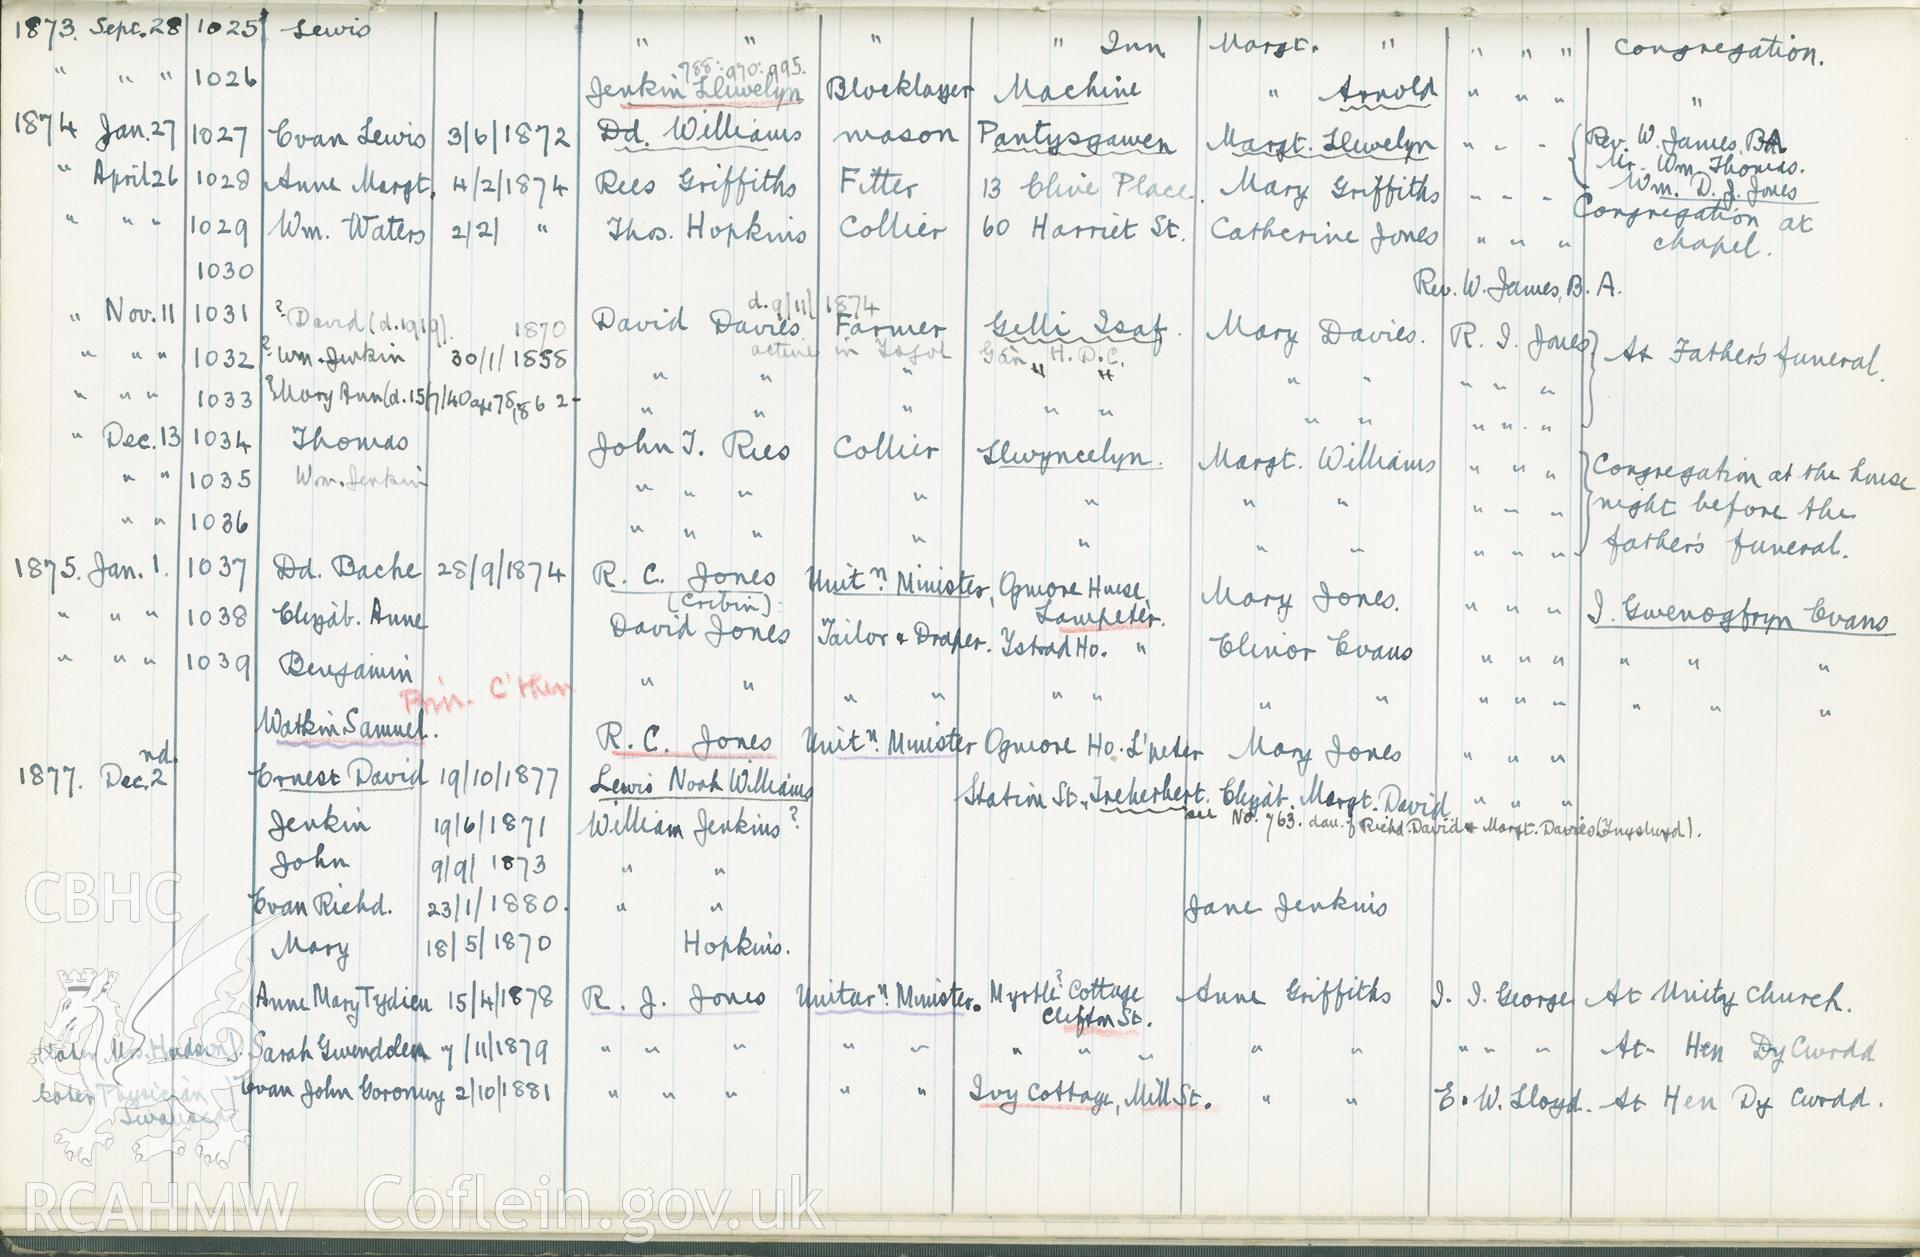 "Baptism Registered" book for Hen Dy Cwrdd, made between April 19th and 28th, 1941, by W. W. Price. Page listing baptisms from 28th September 1873 to 2nd December 1877. Donated to the RCAHMW as part of the Digital Dissent Project.